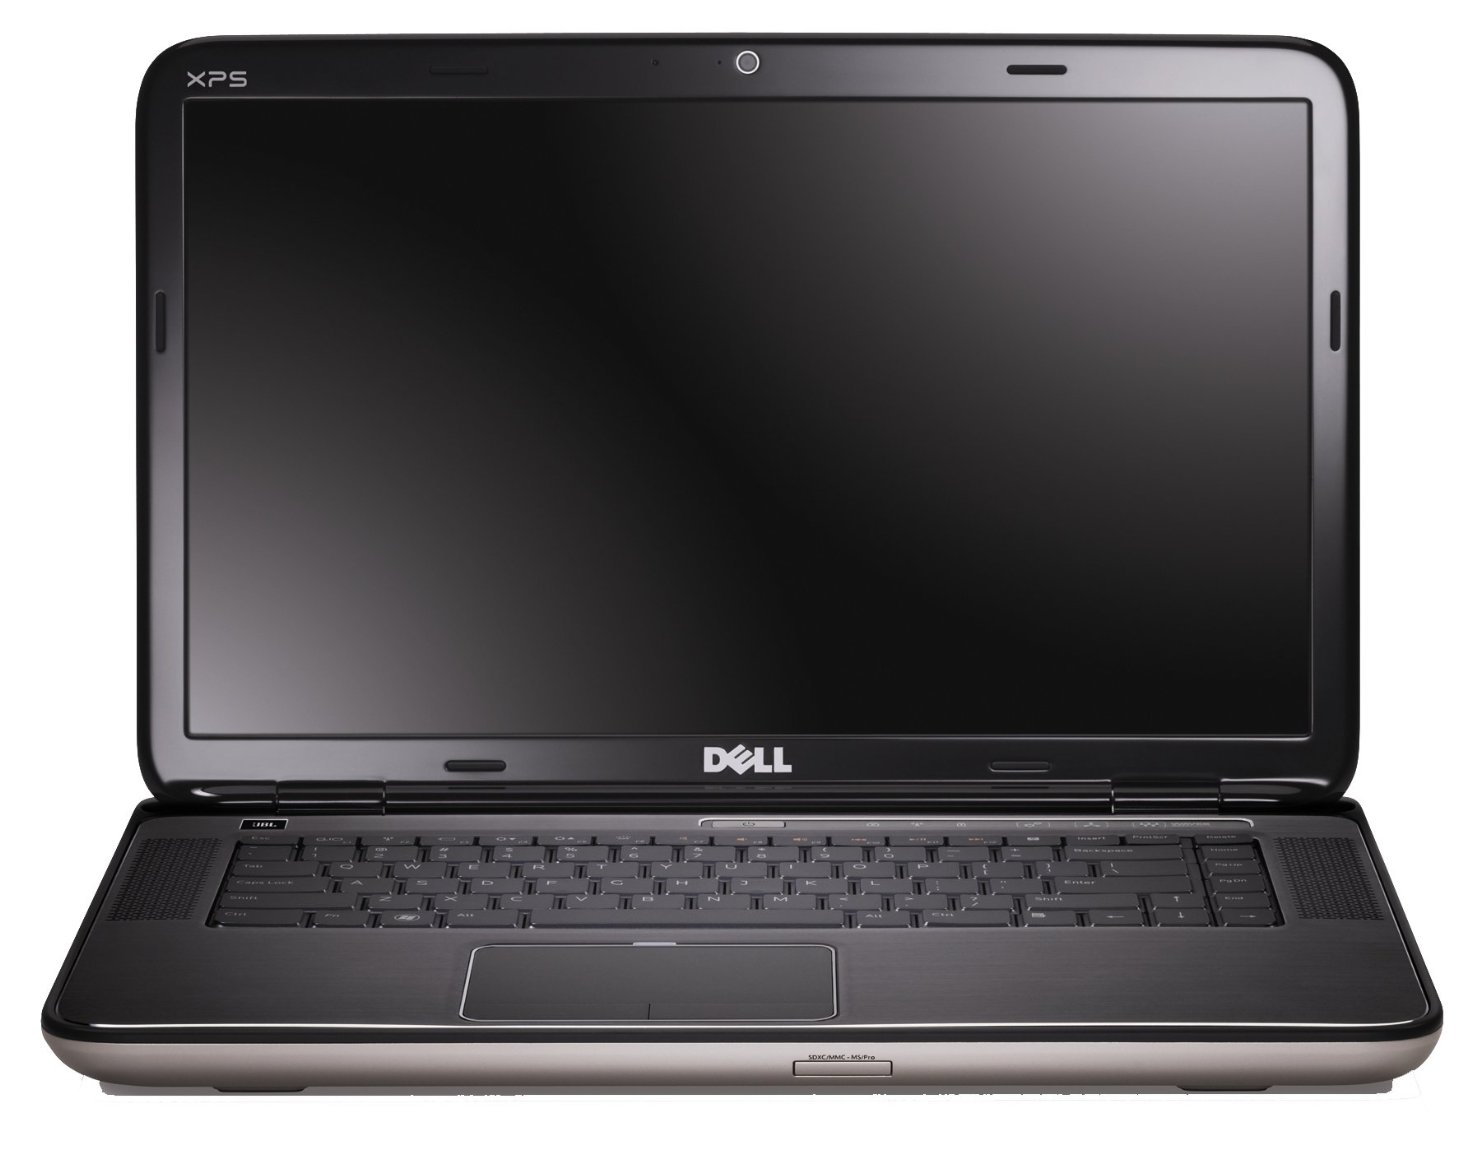  Dell XPS 15 9560-5570  #1